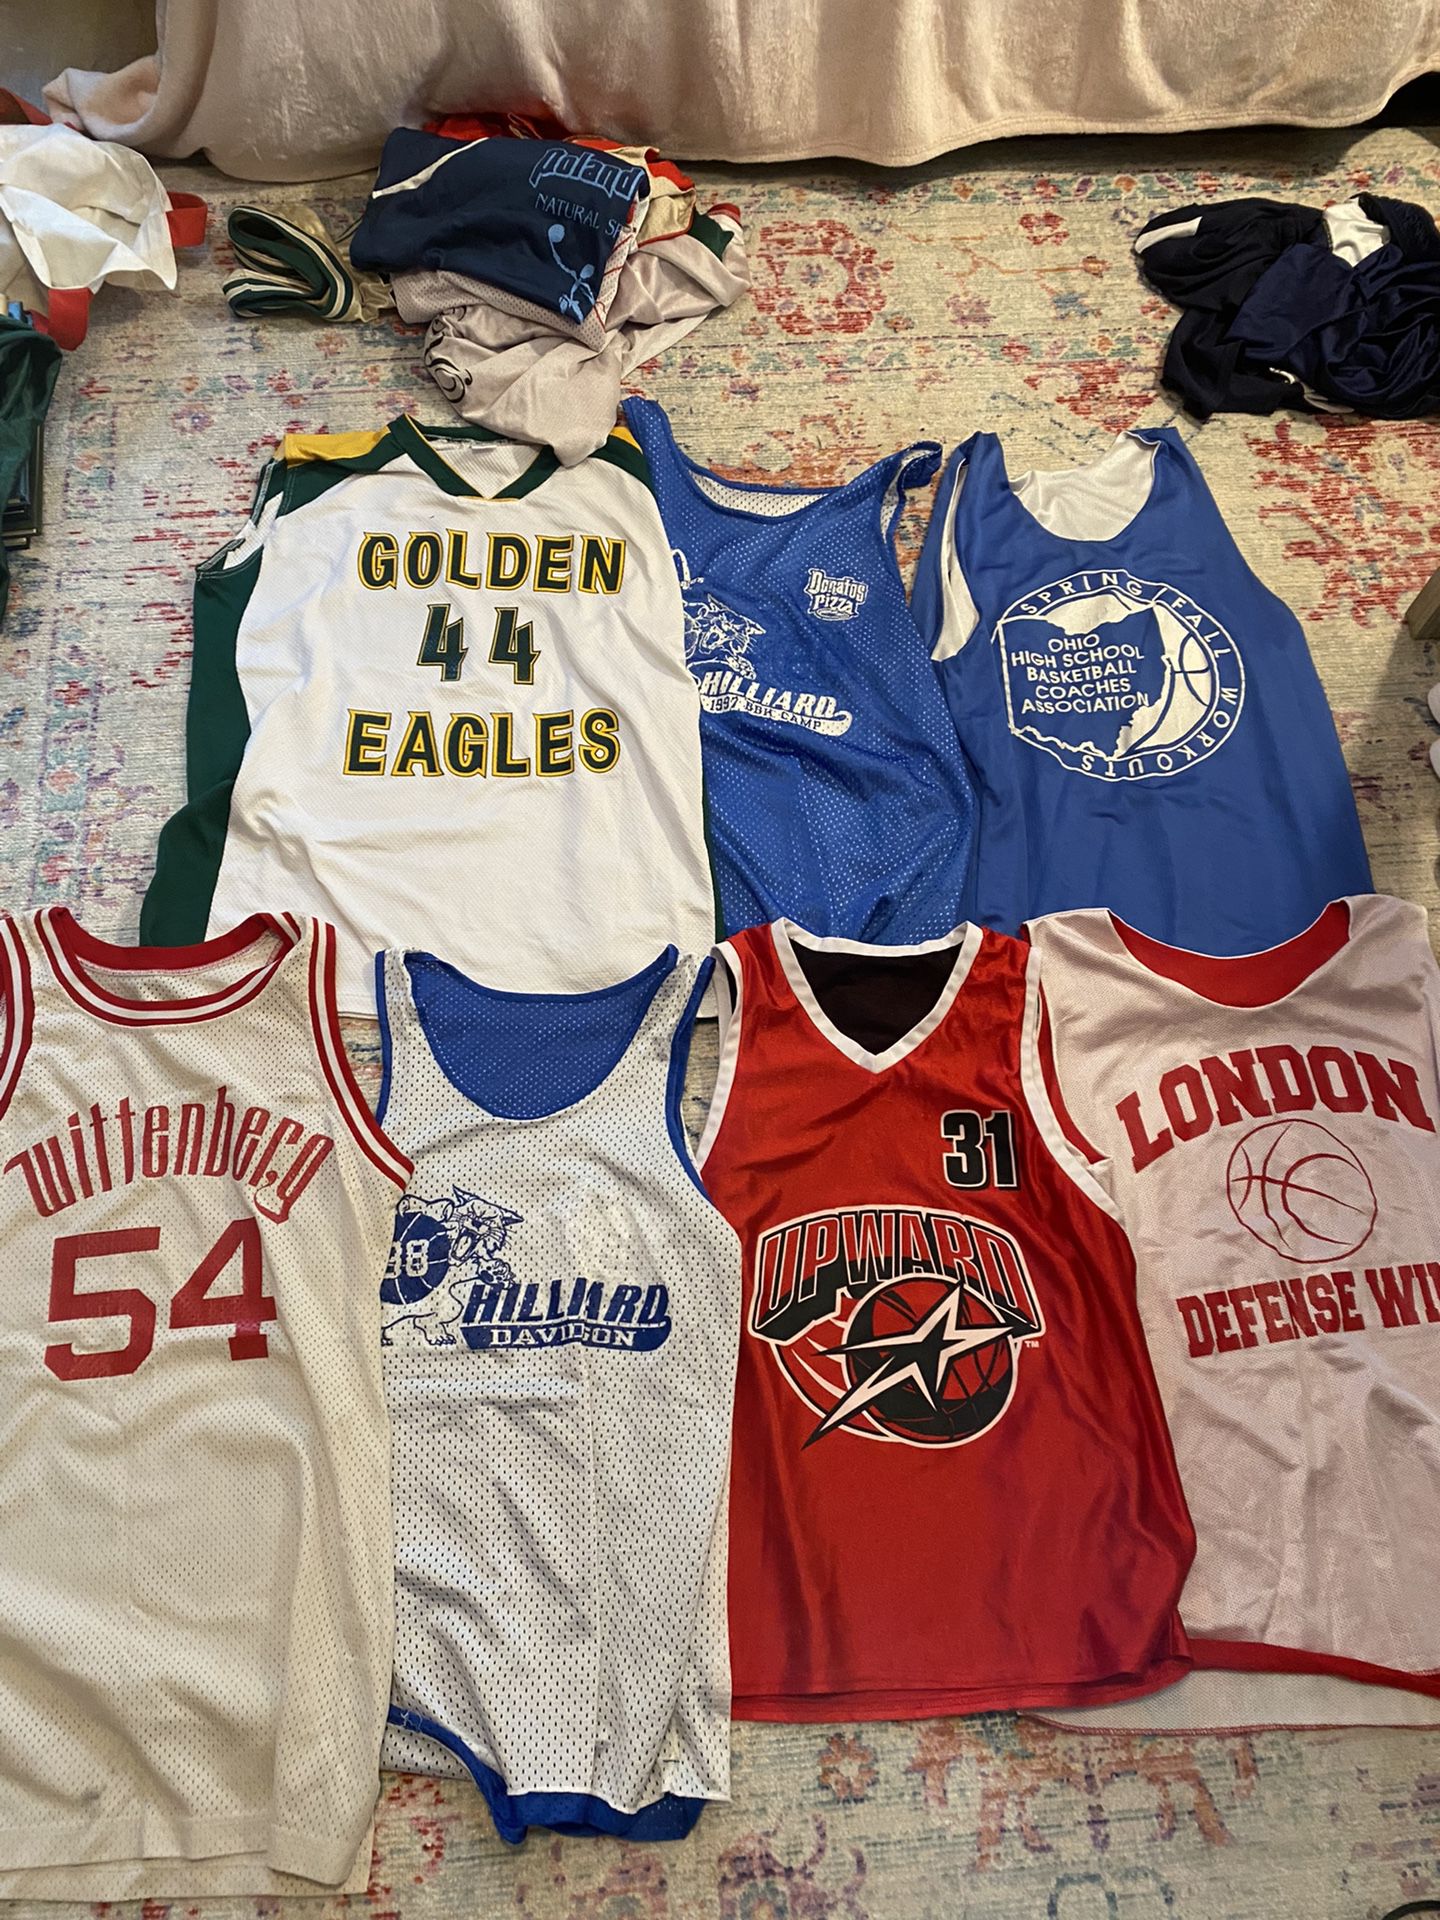 15 Basketball Jerseys and one pair of tear away pants